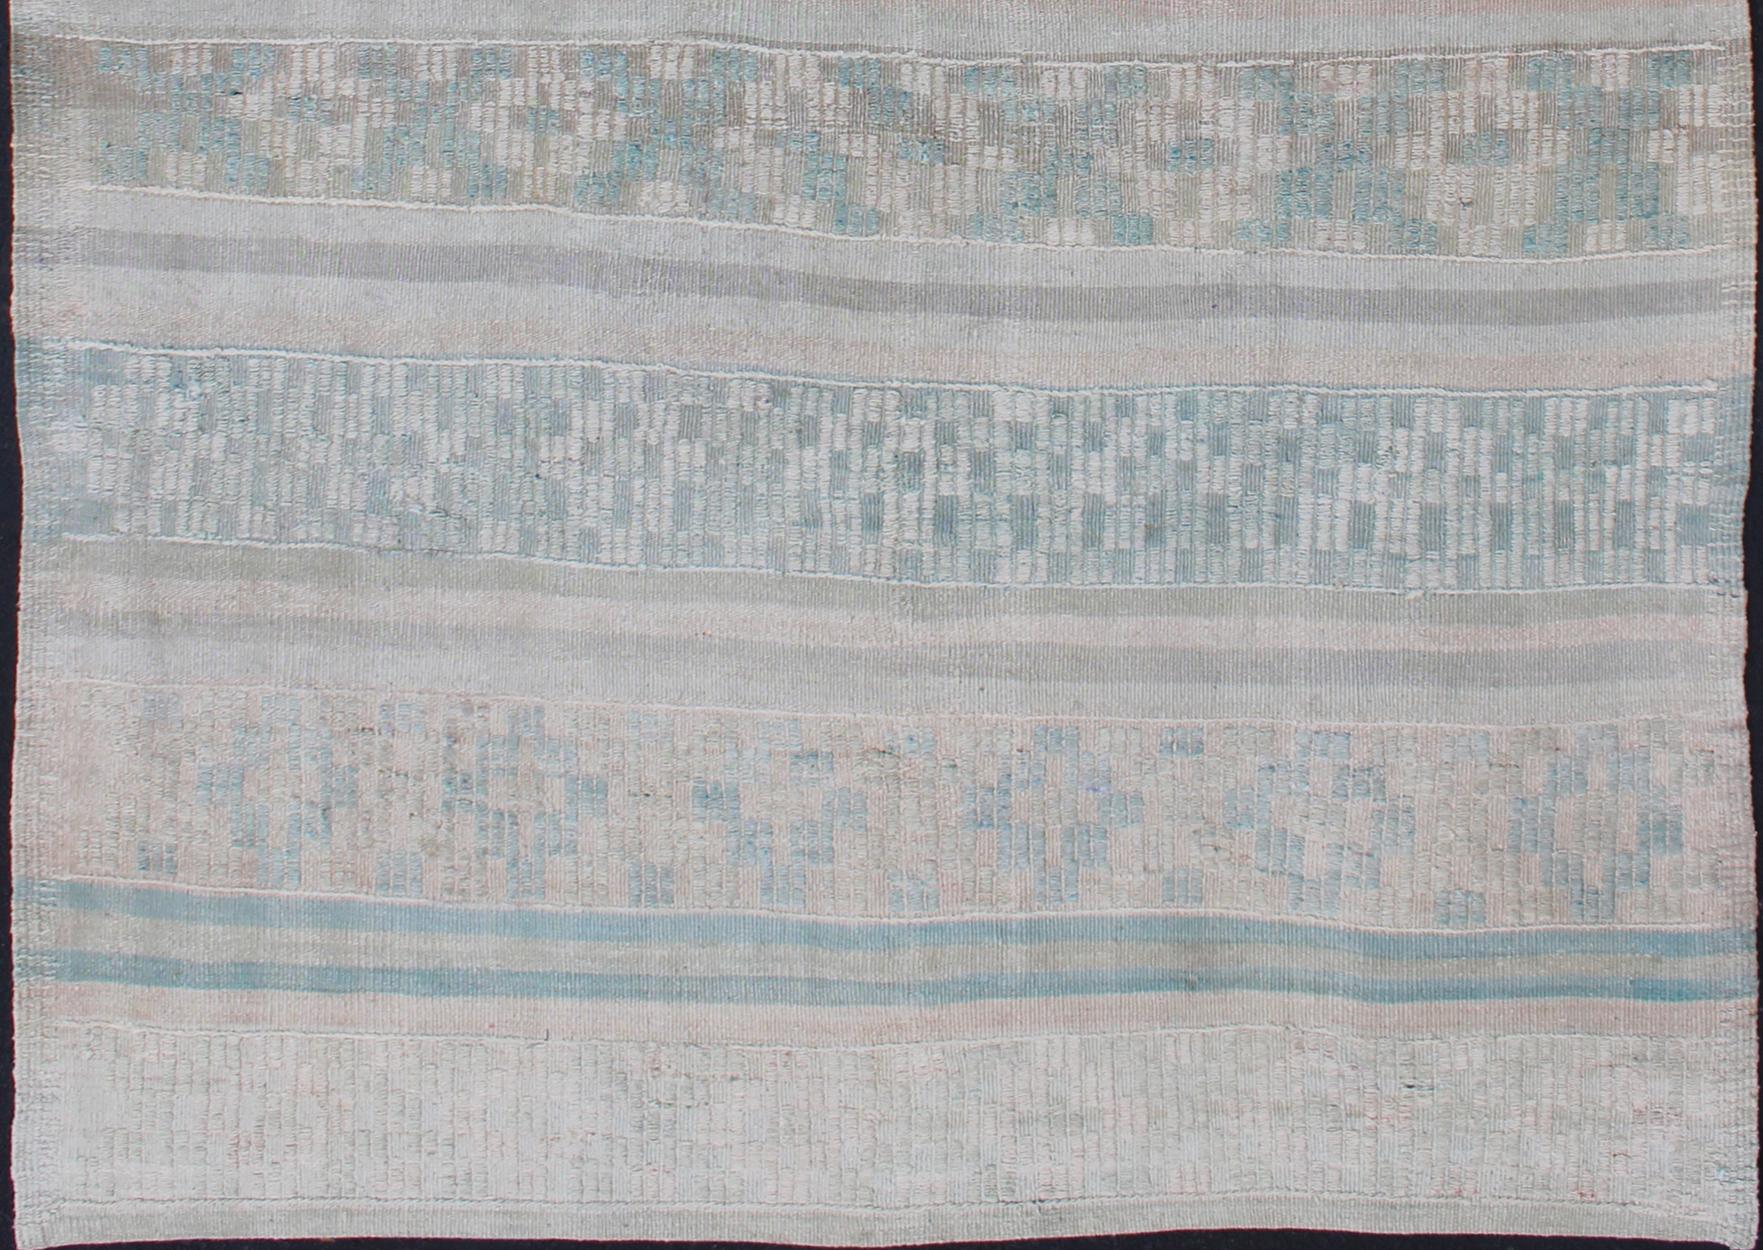 Vintage flat-weave Kilim with embroideries in blush, green, blue and gray with a modern design
geometric stripe design Vintage Kilim from Turkey, rug en-176470, country of origin / type: Turkey / Kilim, circa 1950

This vintage Turkish Kilim rug